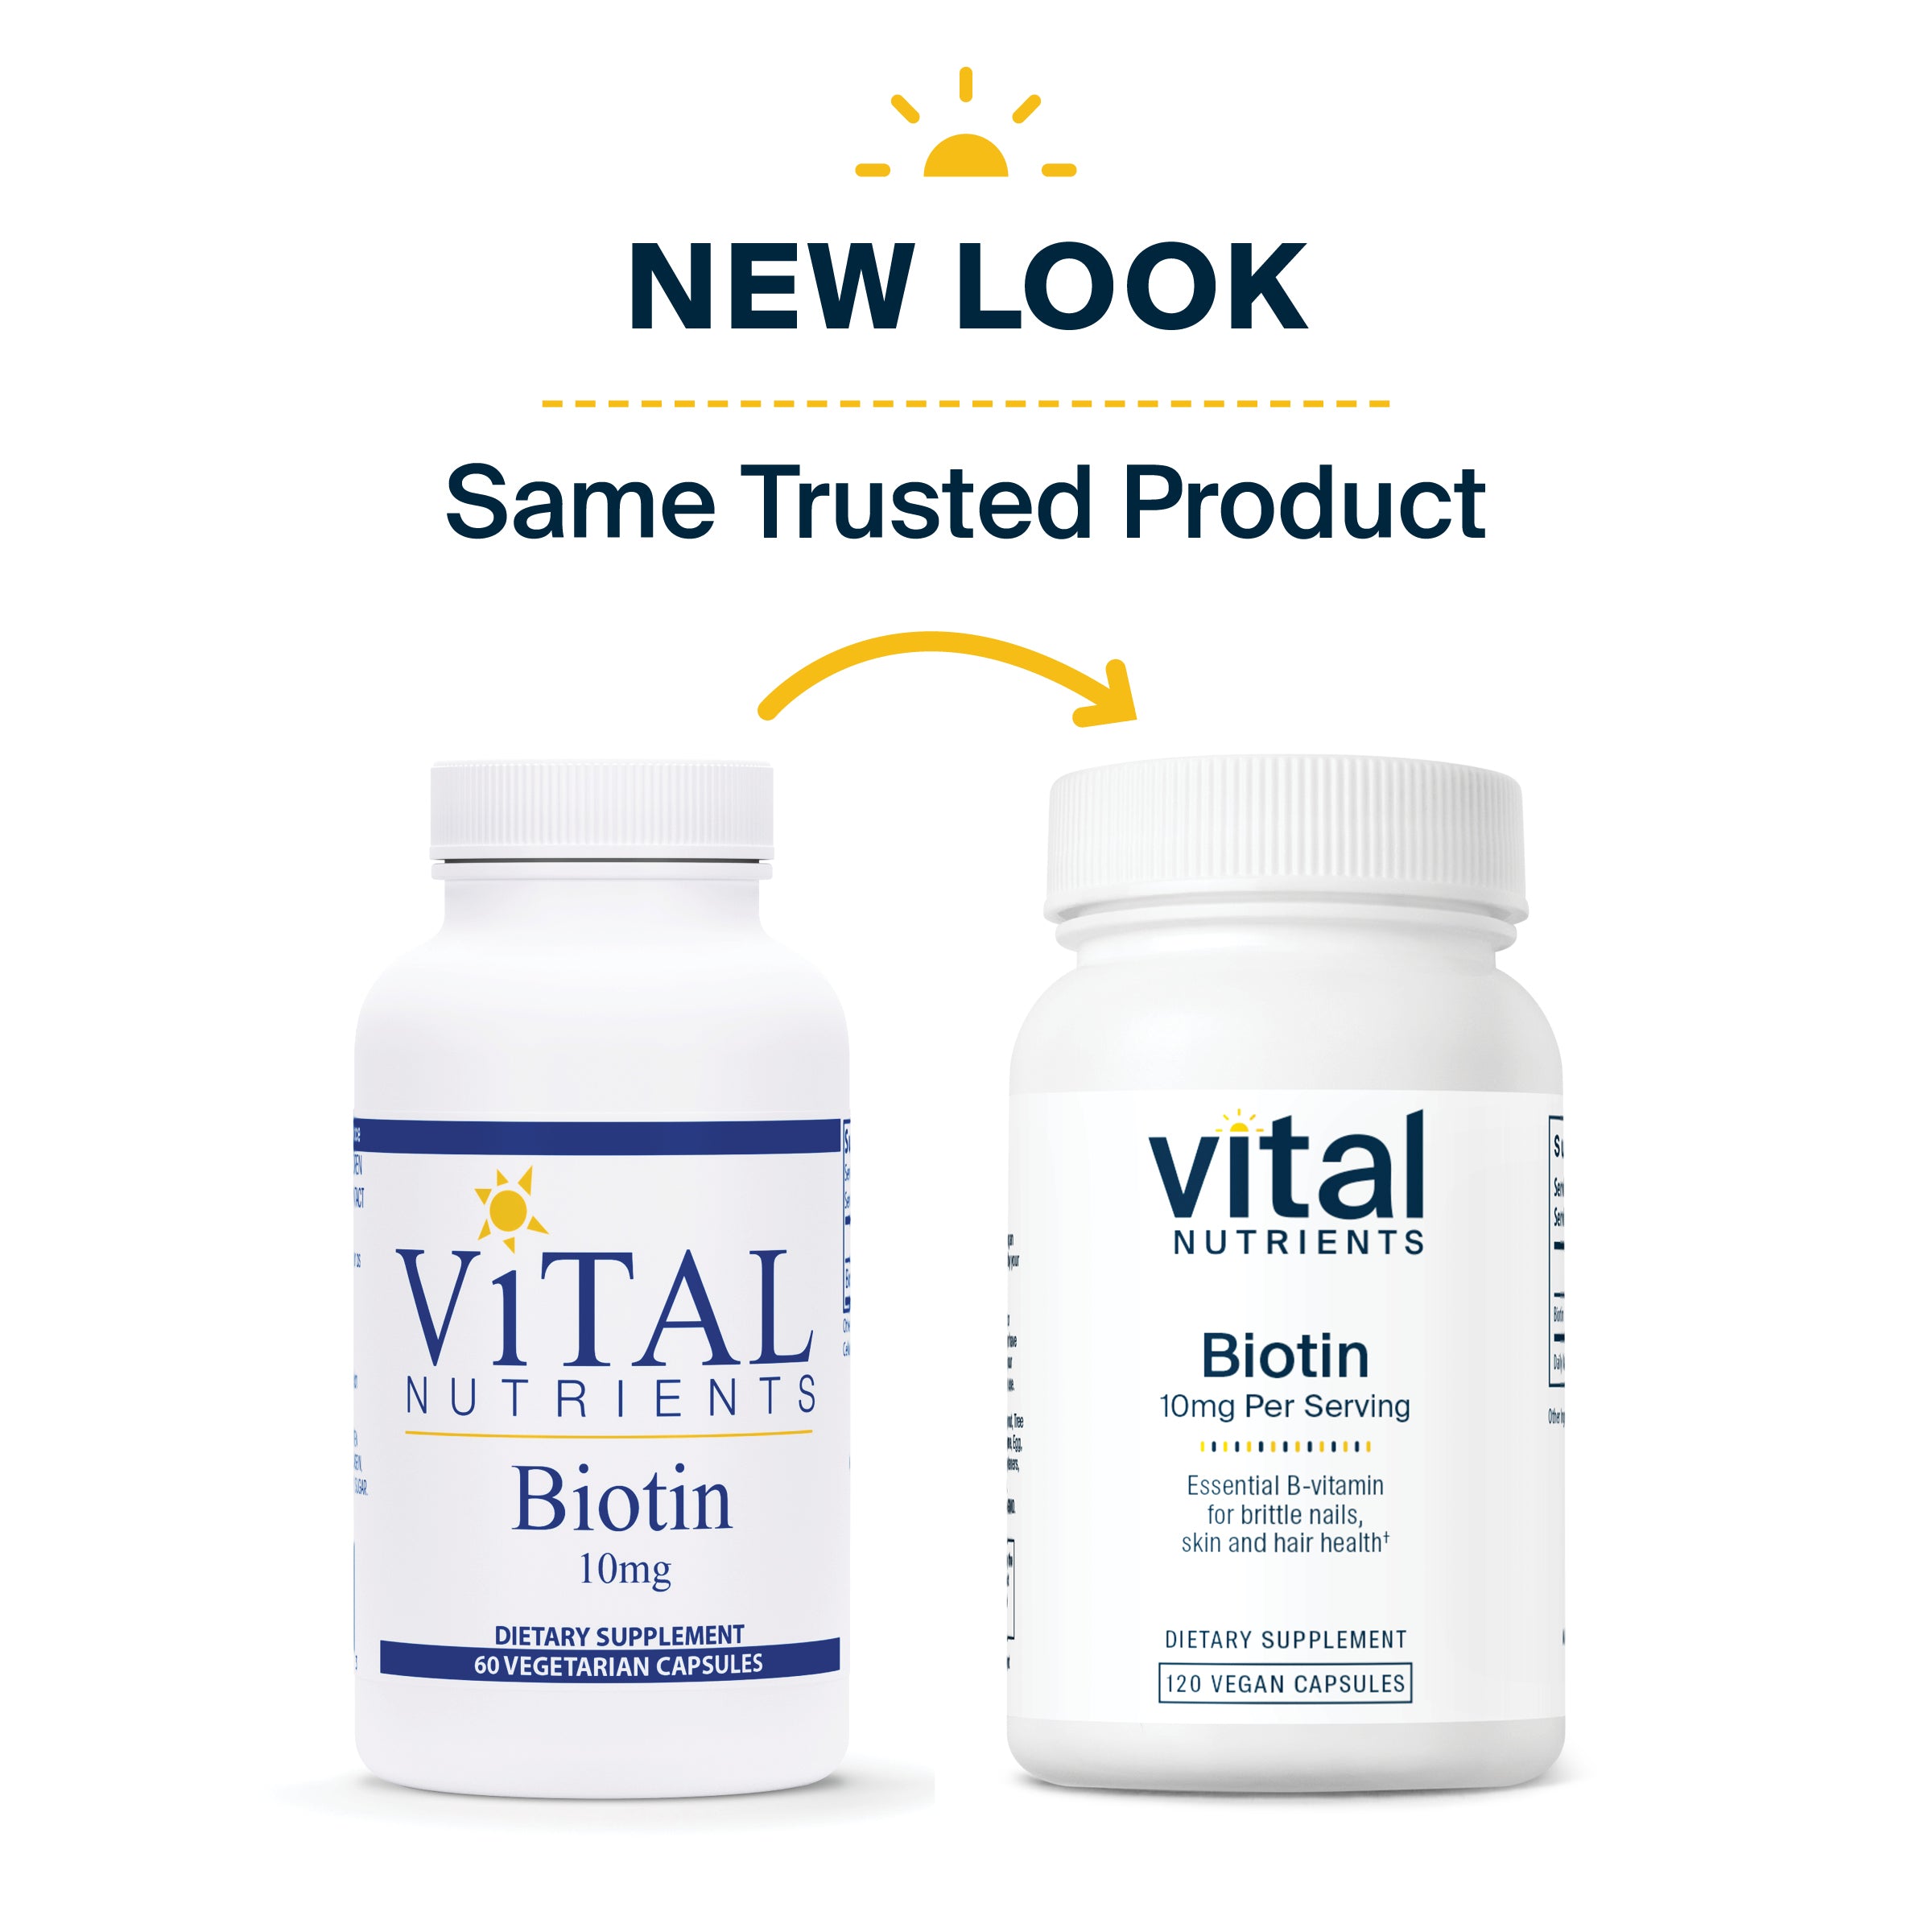 Vital Nutrients bottle comparison. New look, same trusted product.